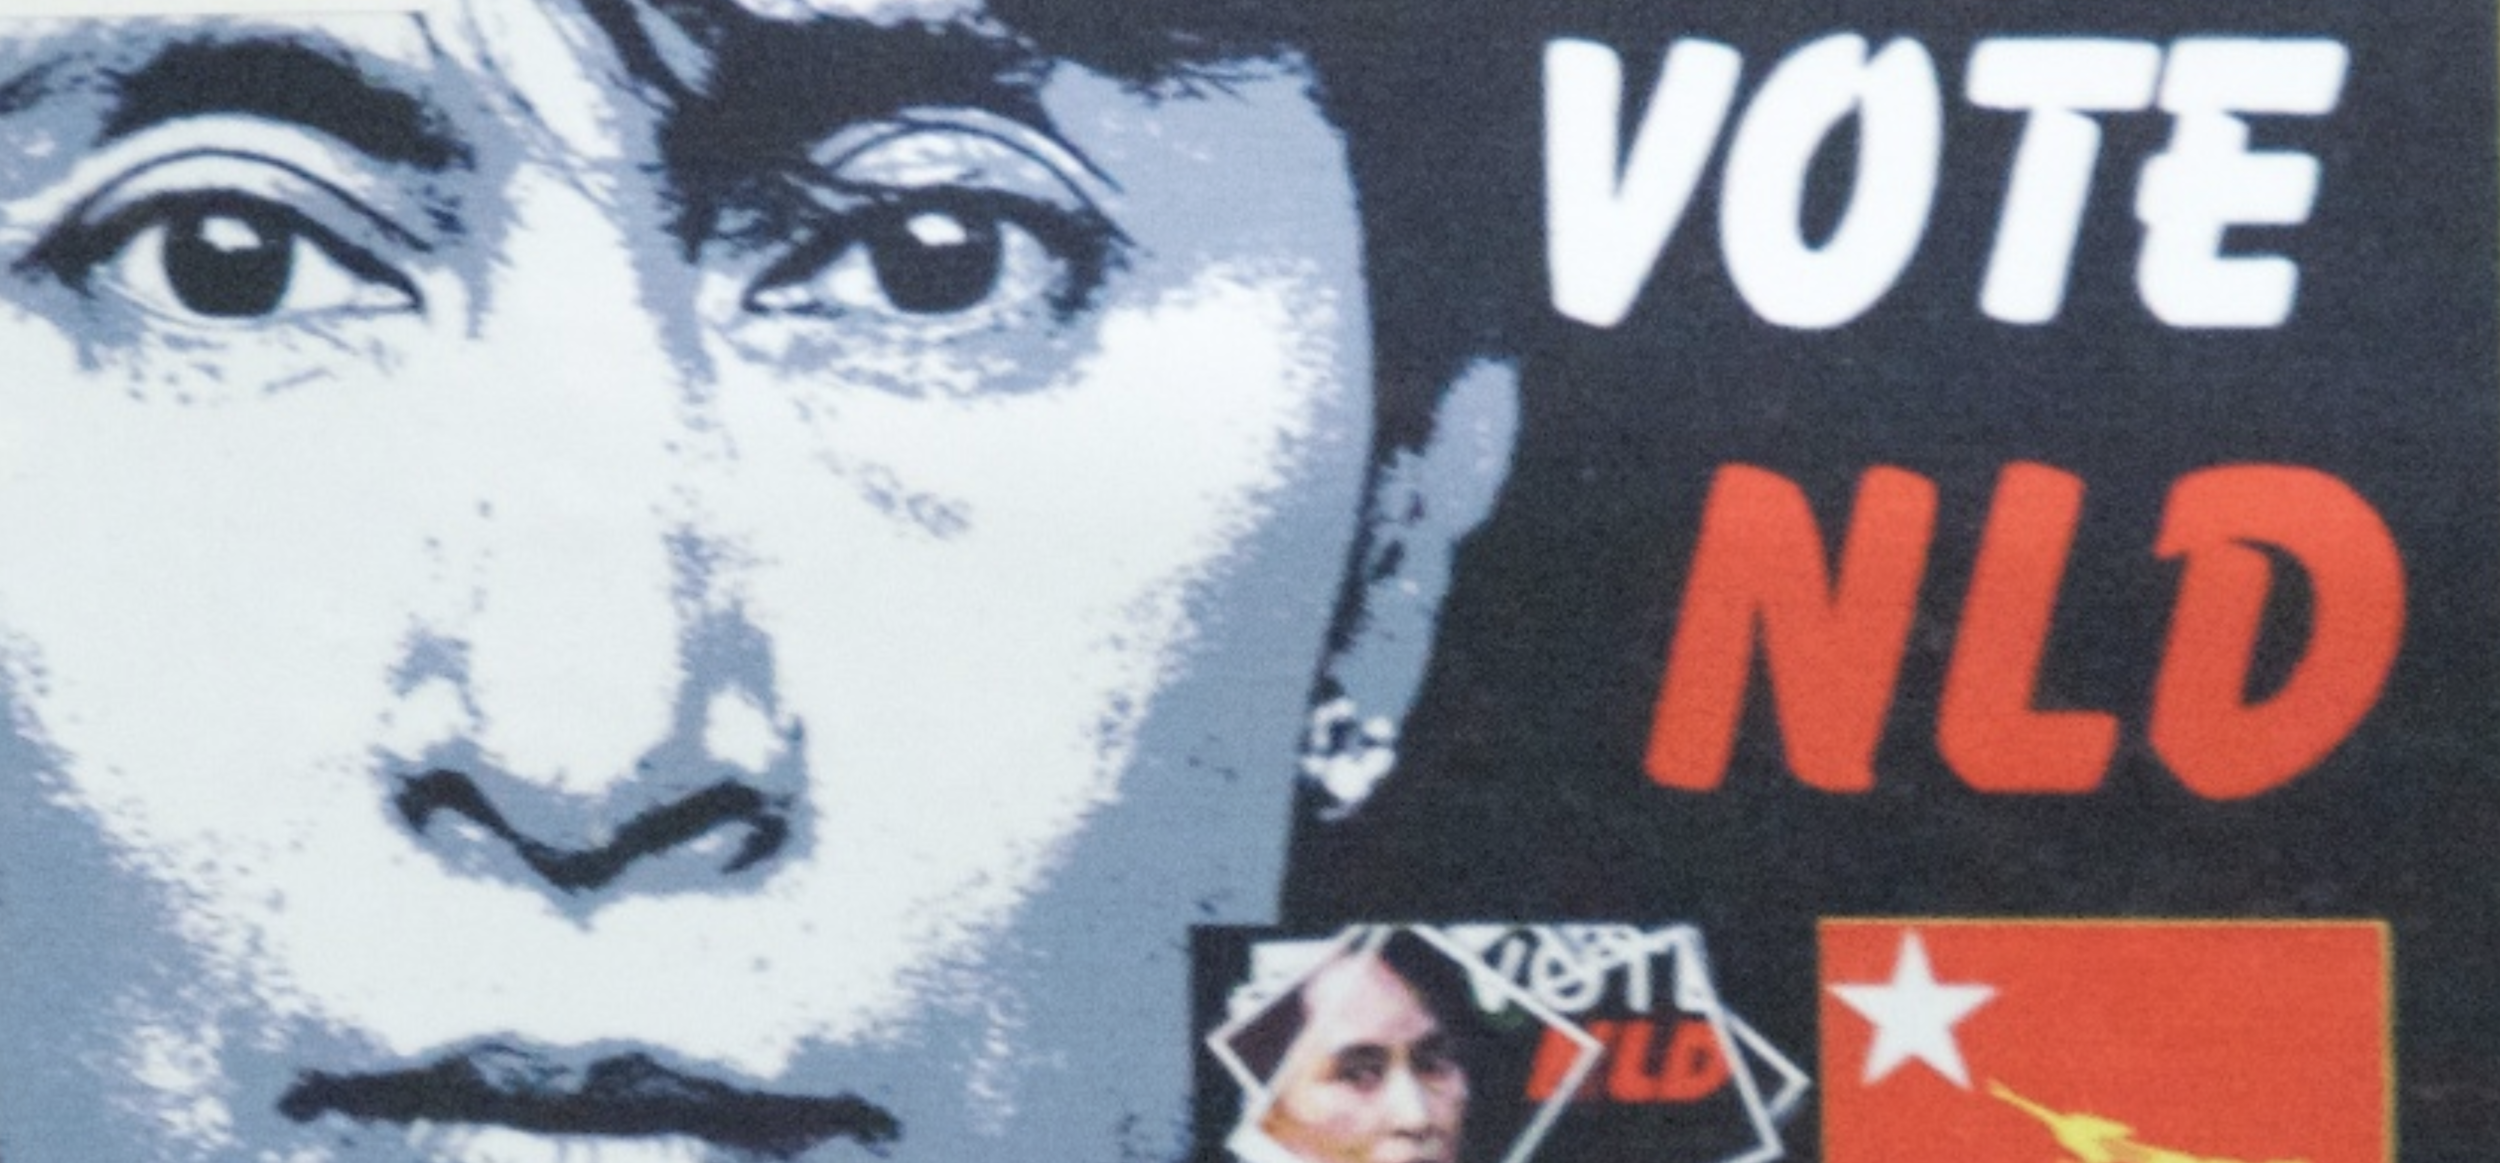  An NLD campaign poster in Yangon, the former capital of Burma and its largest city. In a move that remains unexplained today, the nominally civilian government headed by President Thein Sein initiated a series of political reforms after coming to po